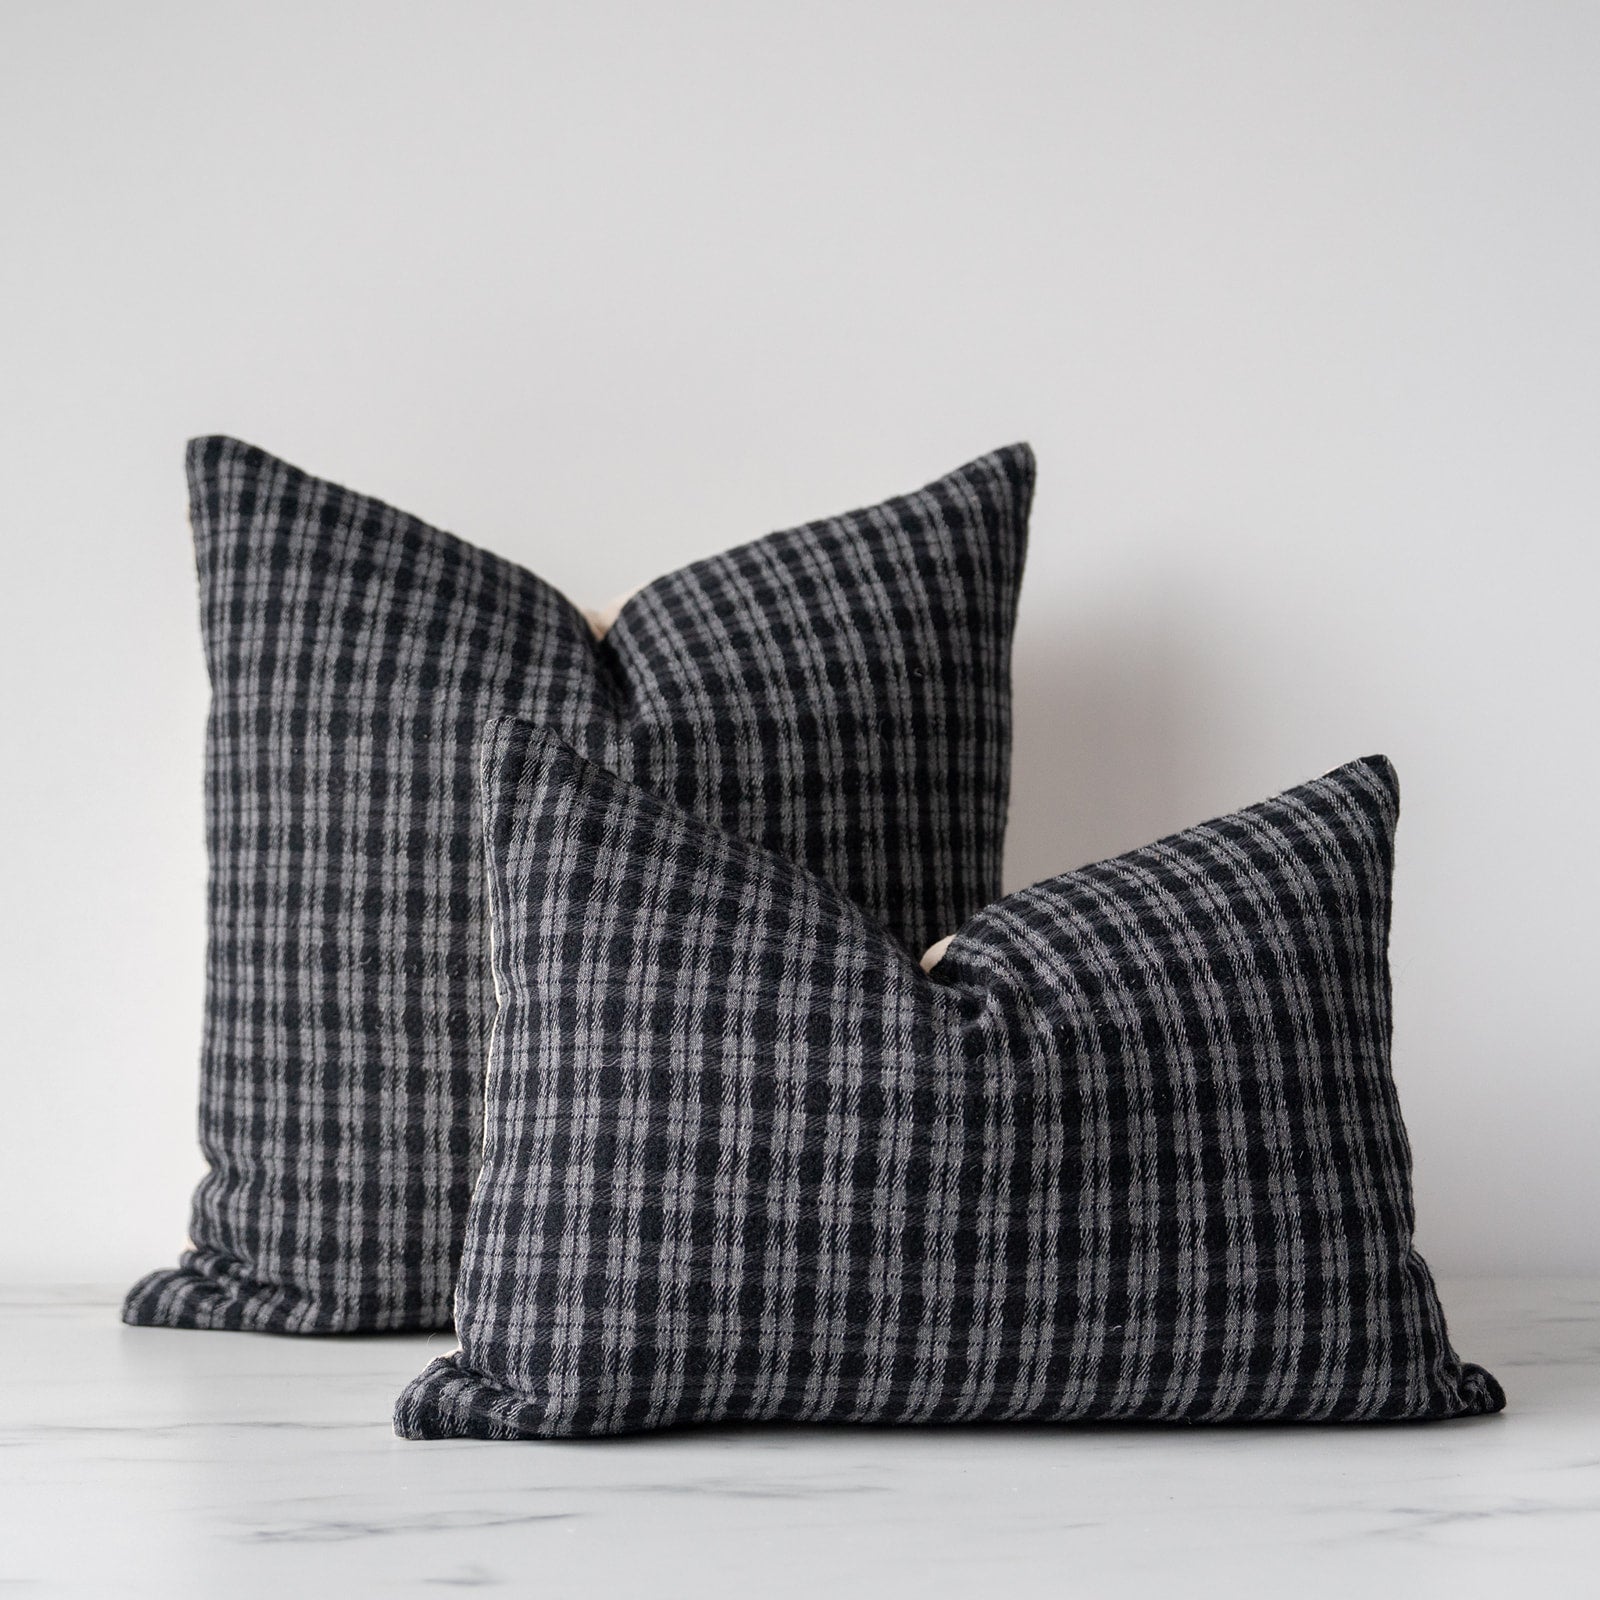 Charcoal plaid pillow covers